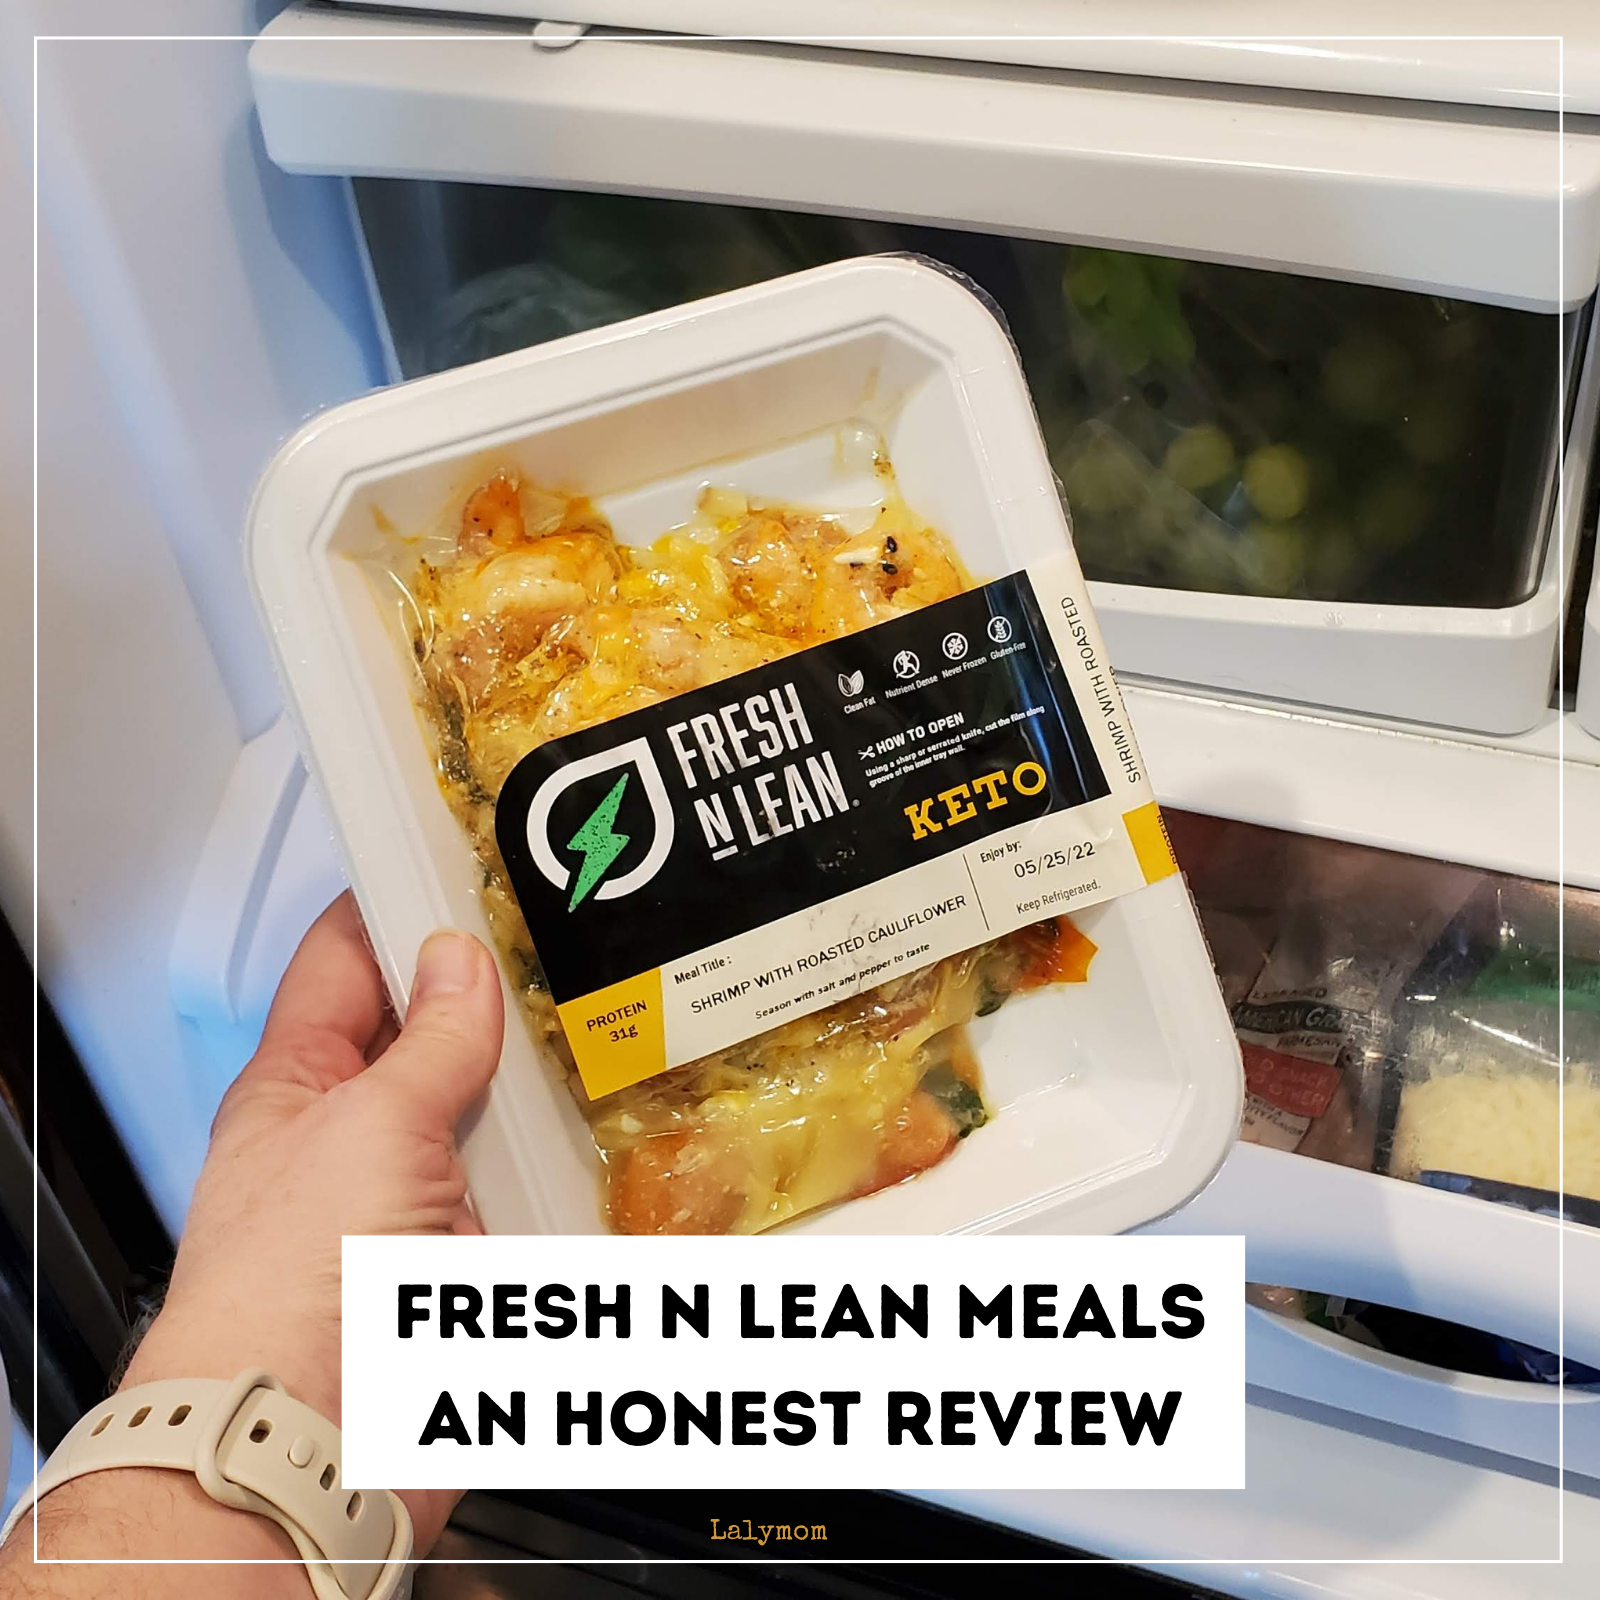 An Honest Fresh N Lean Review: Are Healthy, Pre-cooked Meals Any Good?